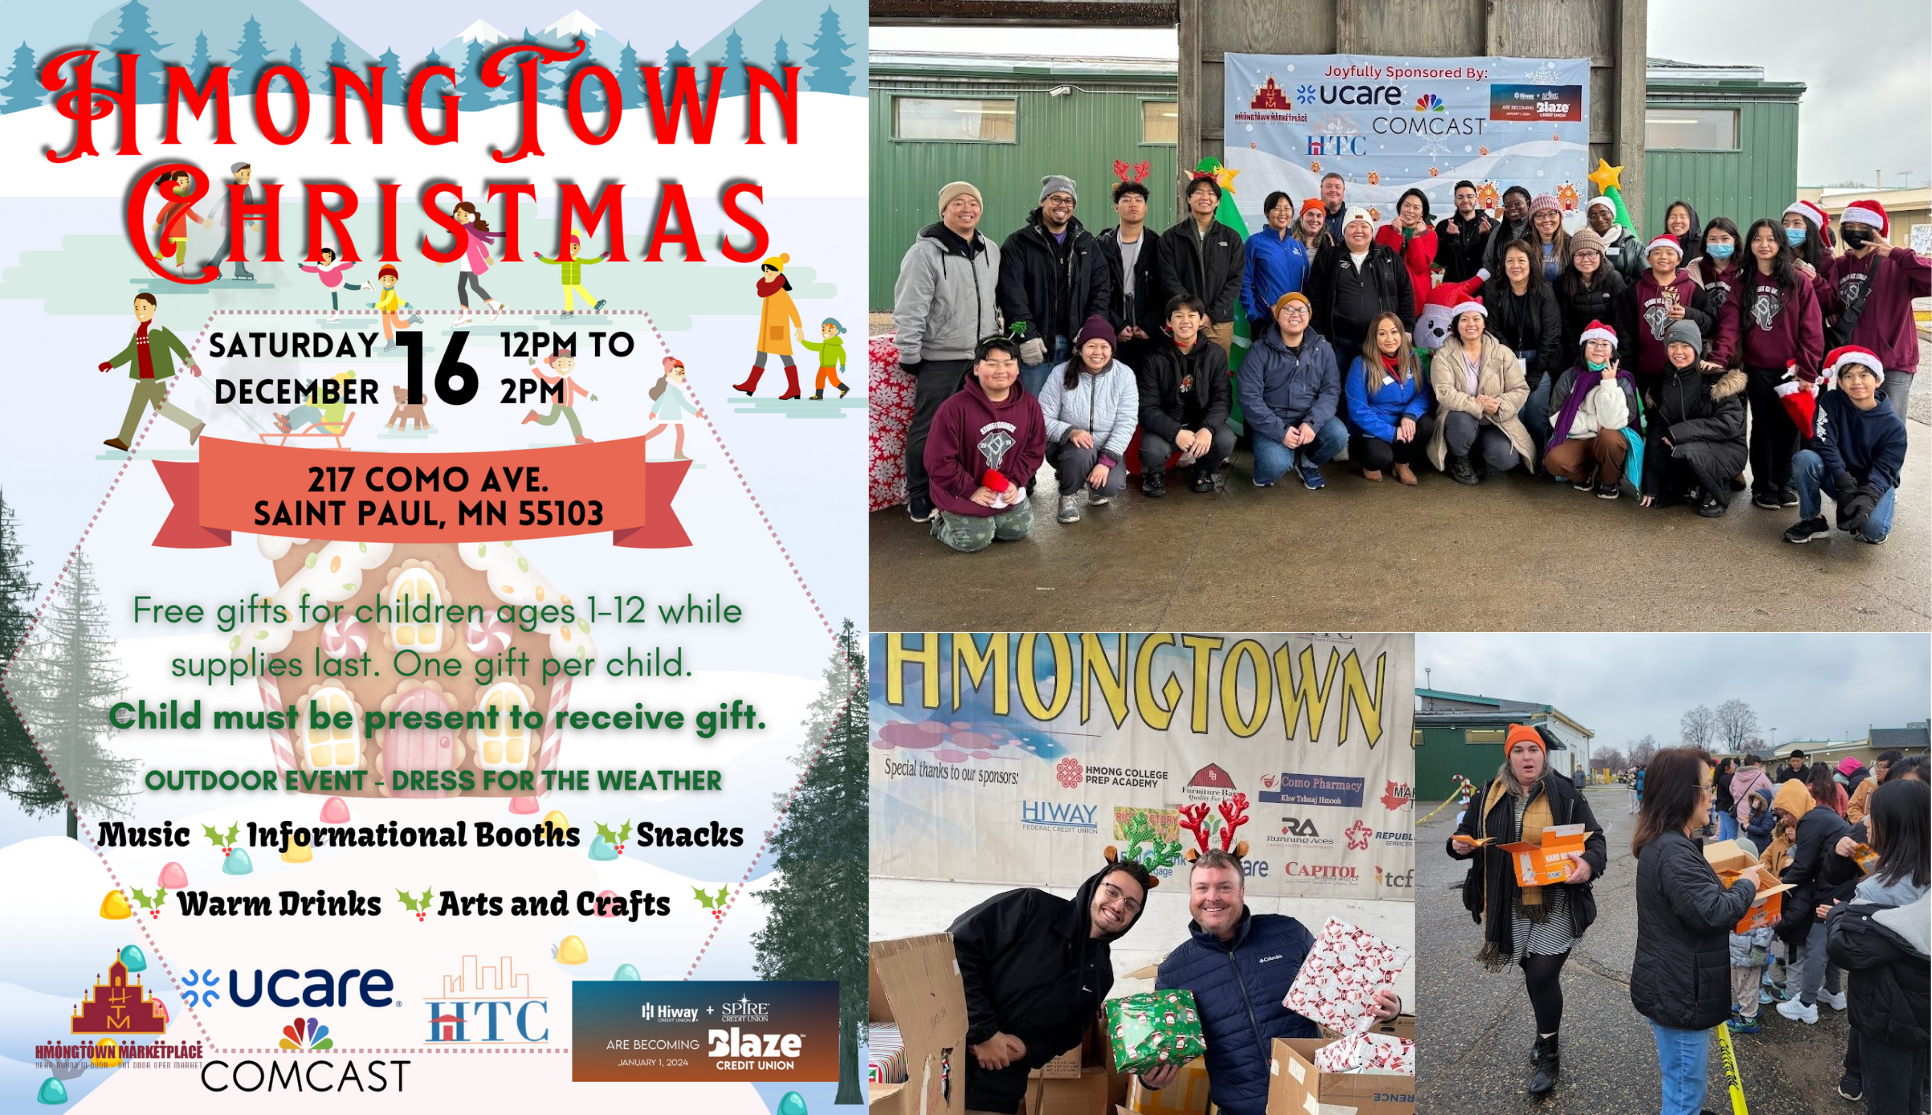 Comcast Brings Warmth and Cheer with Hmongtown Marketplace